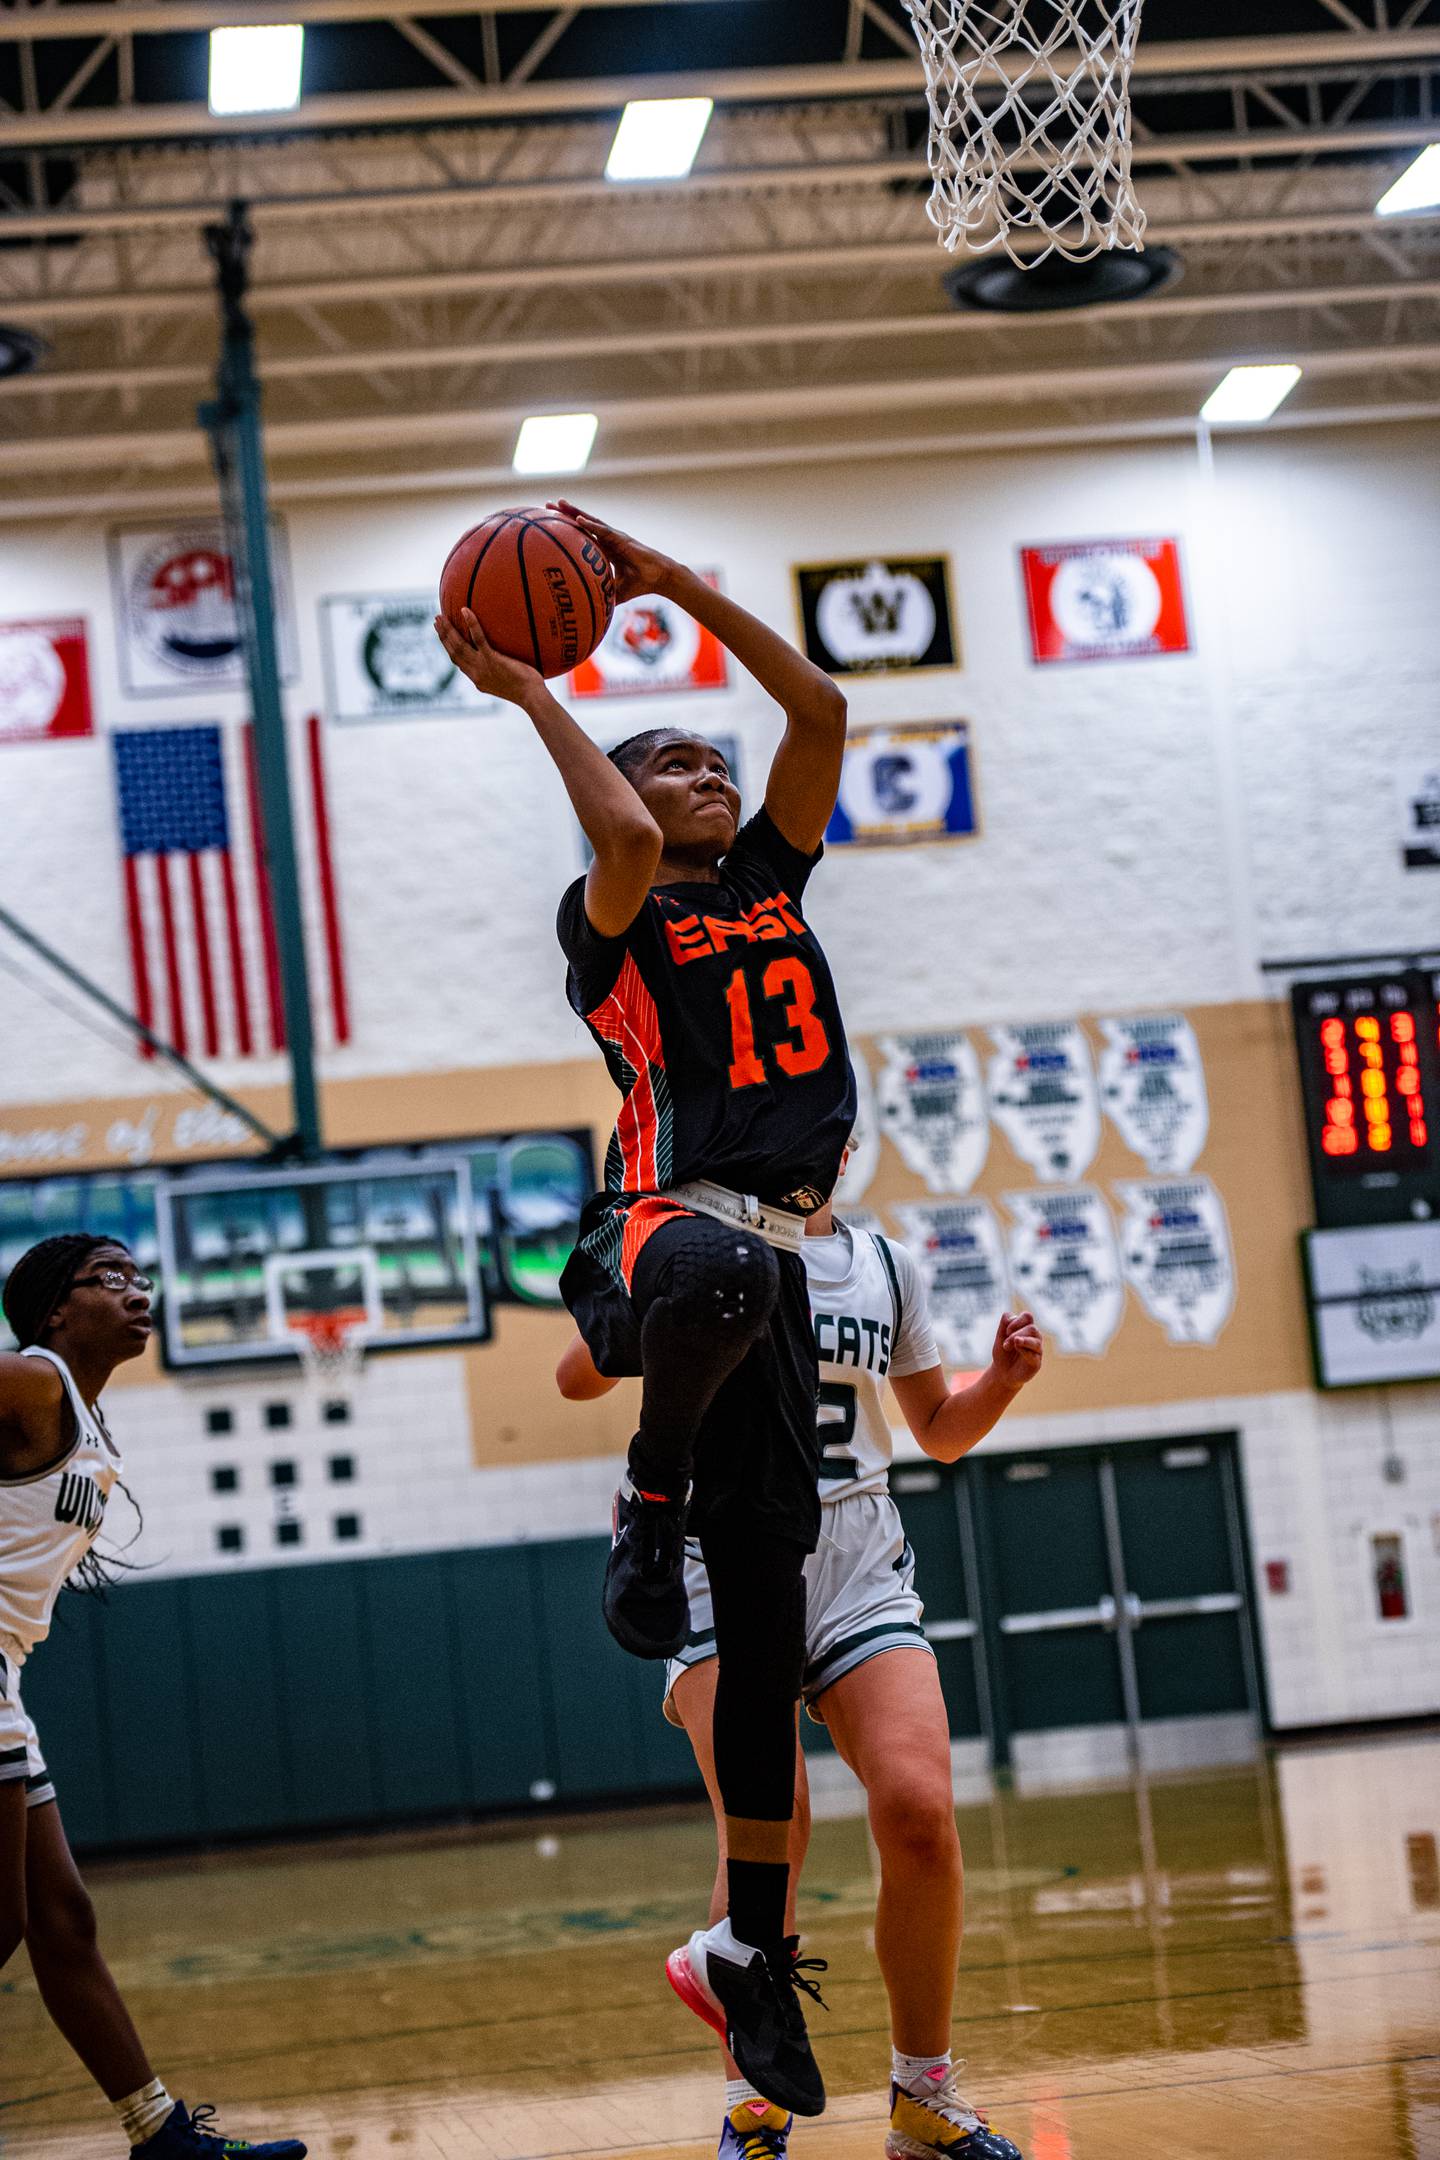 Plainfield Easts Jocelyn Trotter lays up a shot during a game against Plainfield Central Thursday Dec. 1, 2022 at Plainfield Central  High School